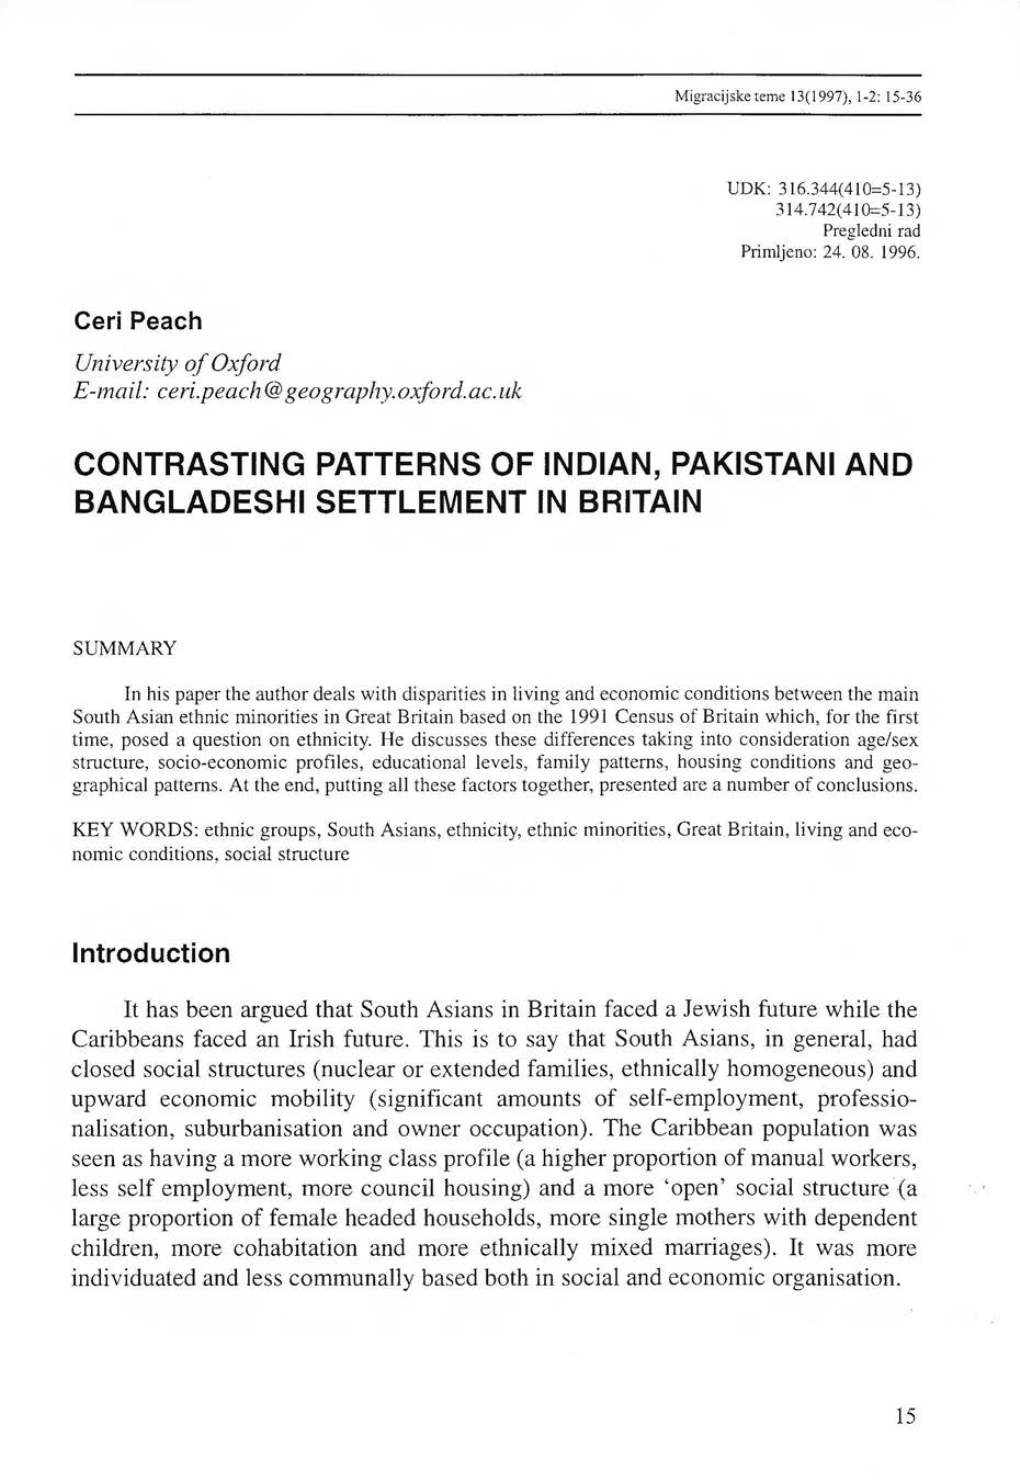 Contrasting Patterns of Indian, Pakistani and Bangladeshi Settlement in Britain